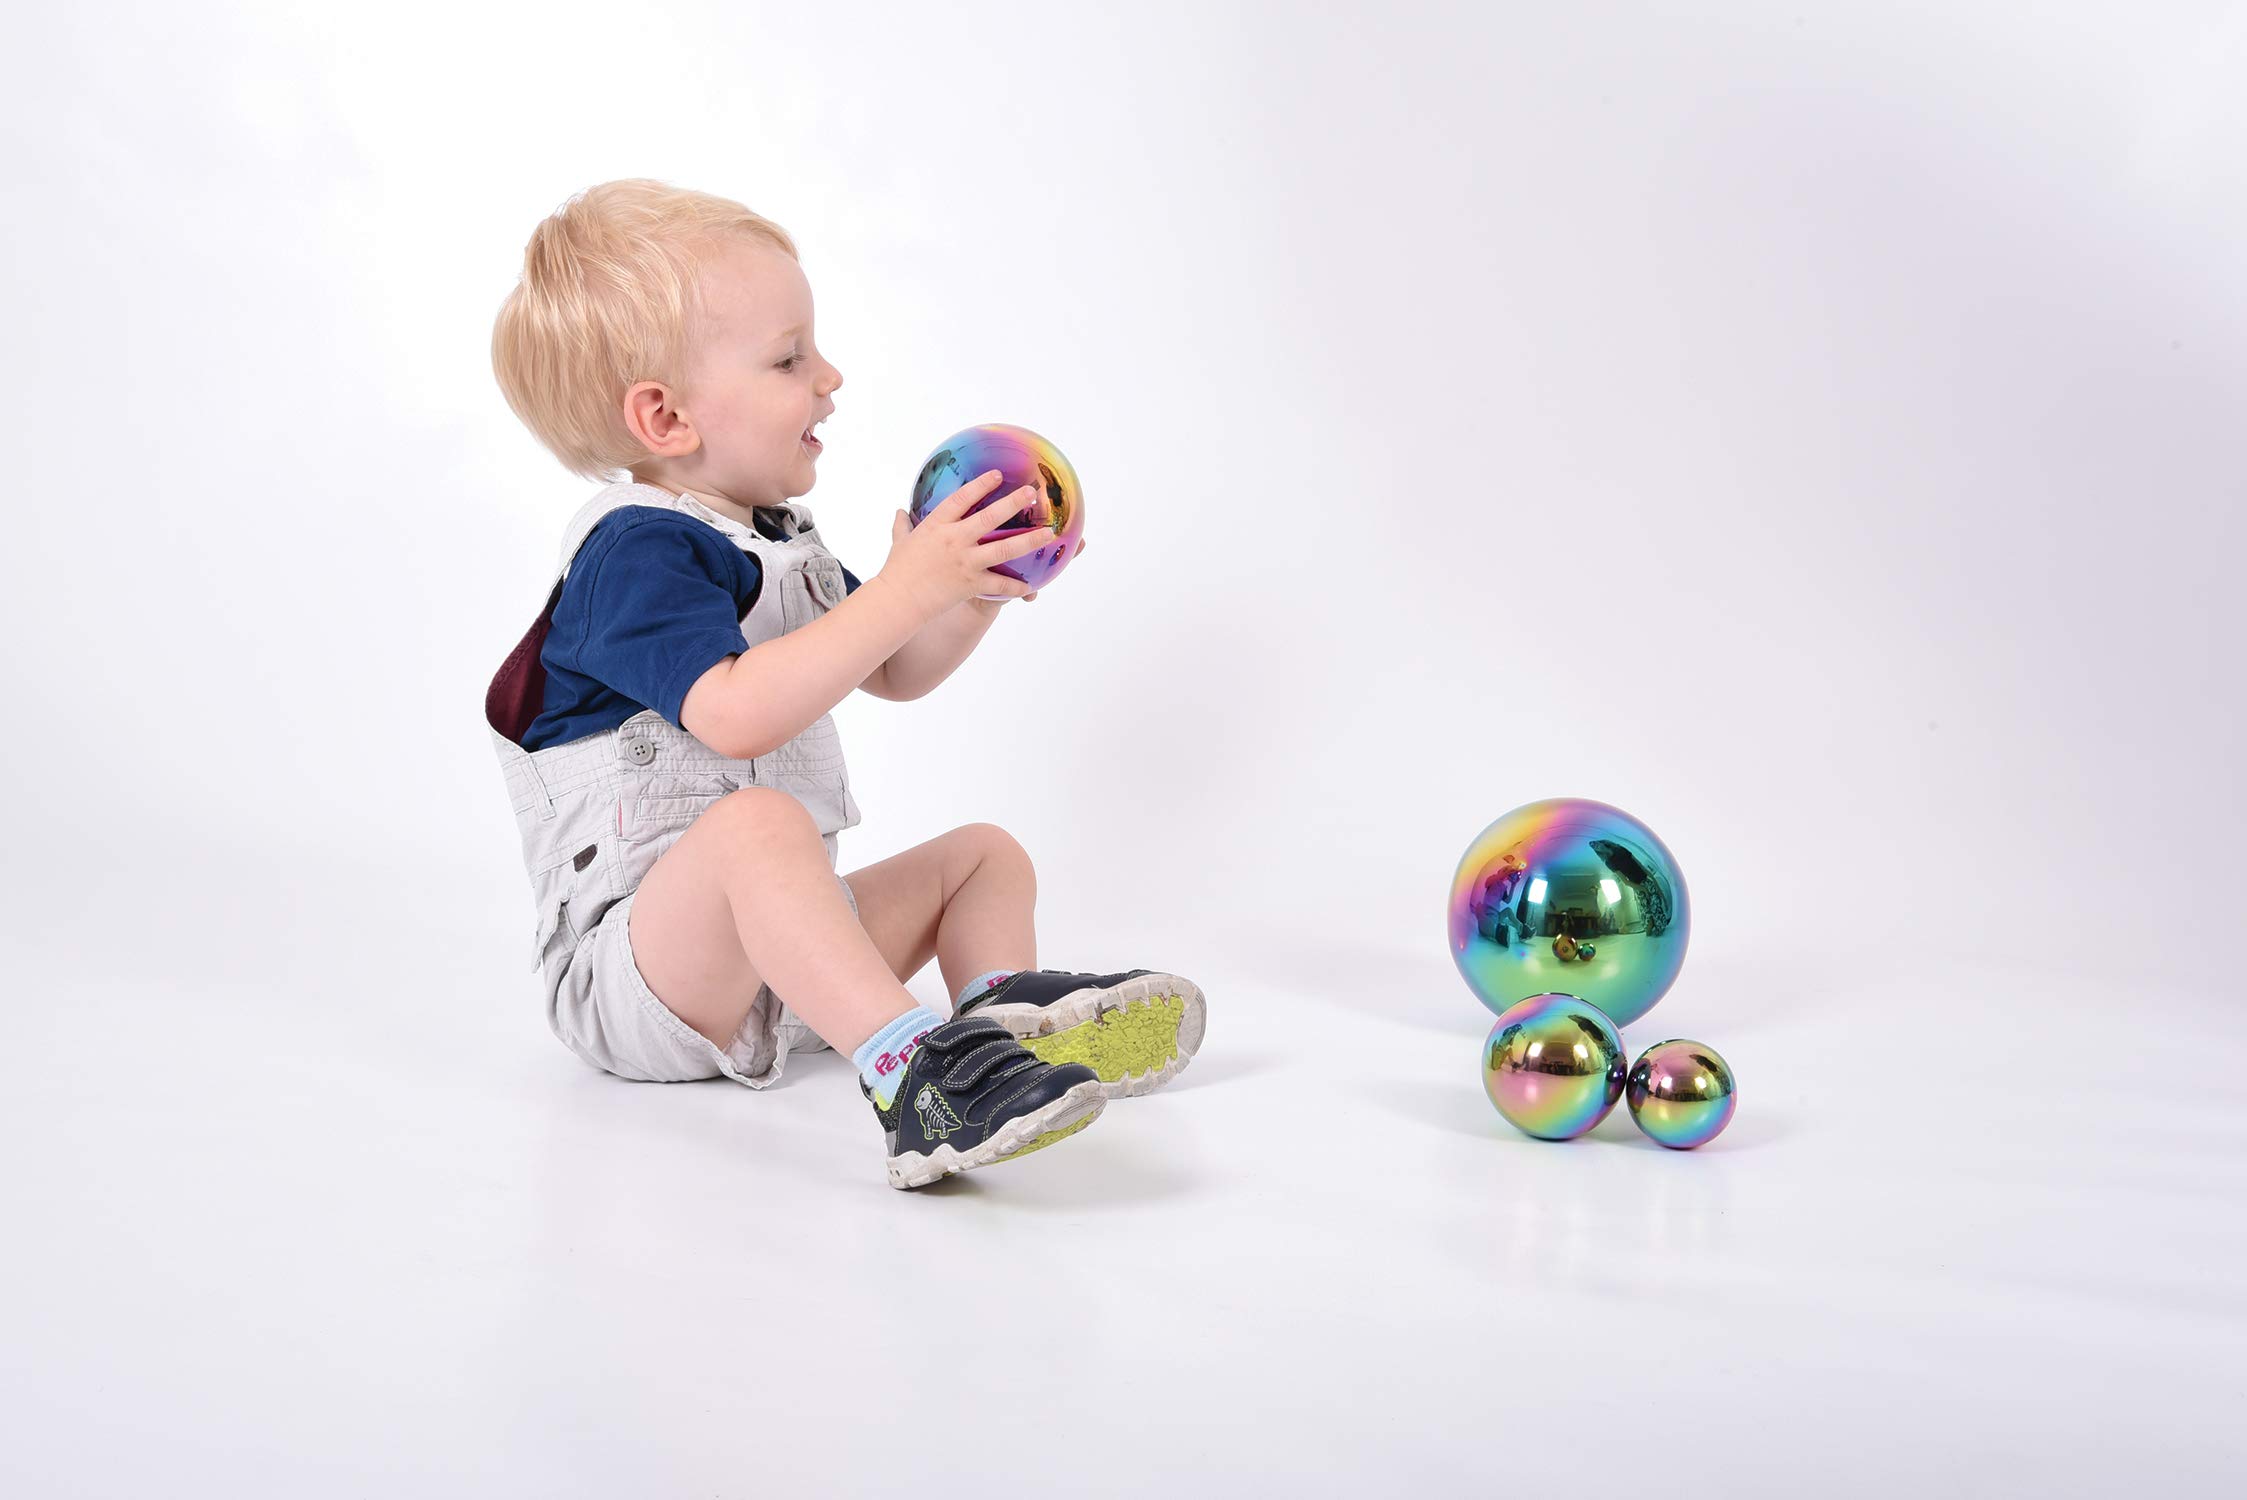 TickiT - 72221 Sensory Reflective Balls - Color Burst - Set Of 4 - Ages 0m+ - Mirrored, Iridescent Spheres For Babies And Toddlers - Calming Sensory Toy